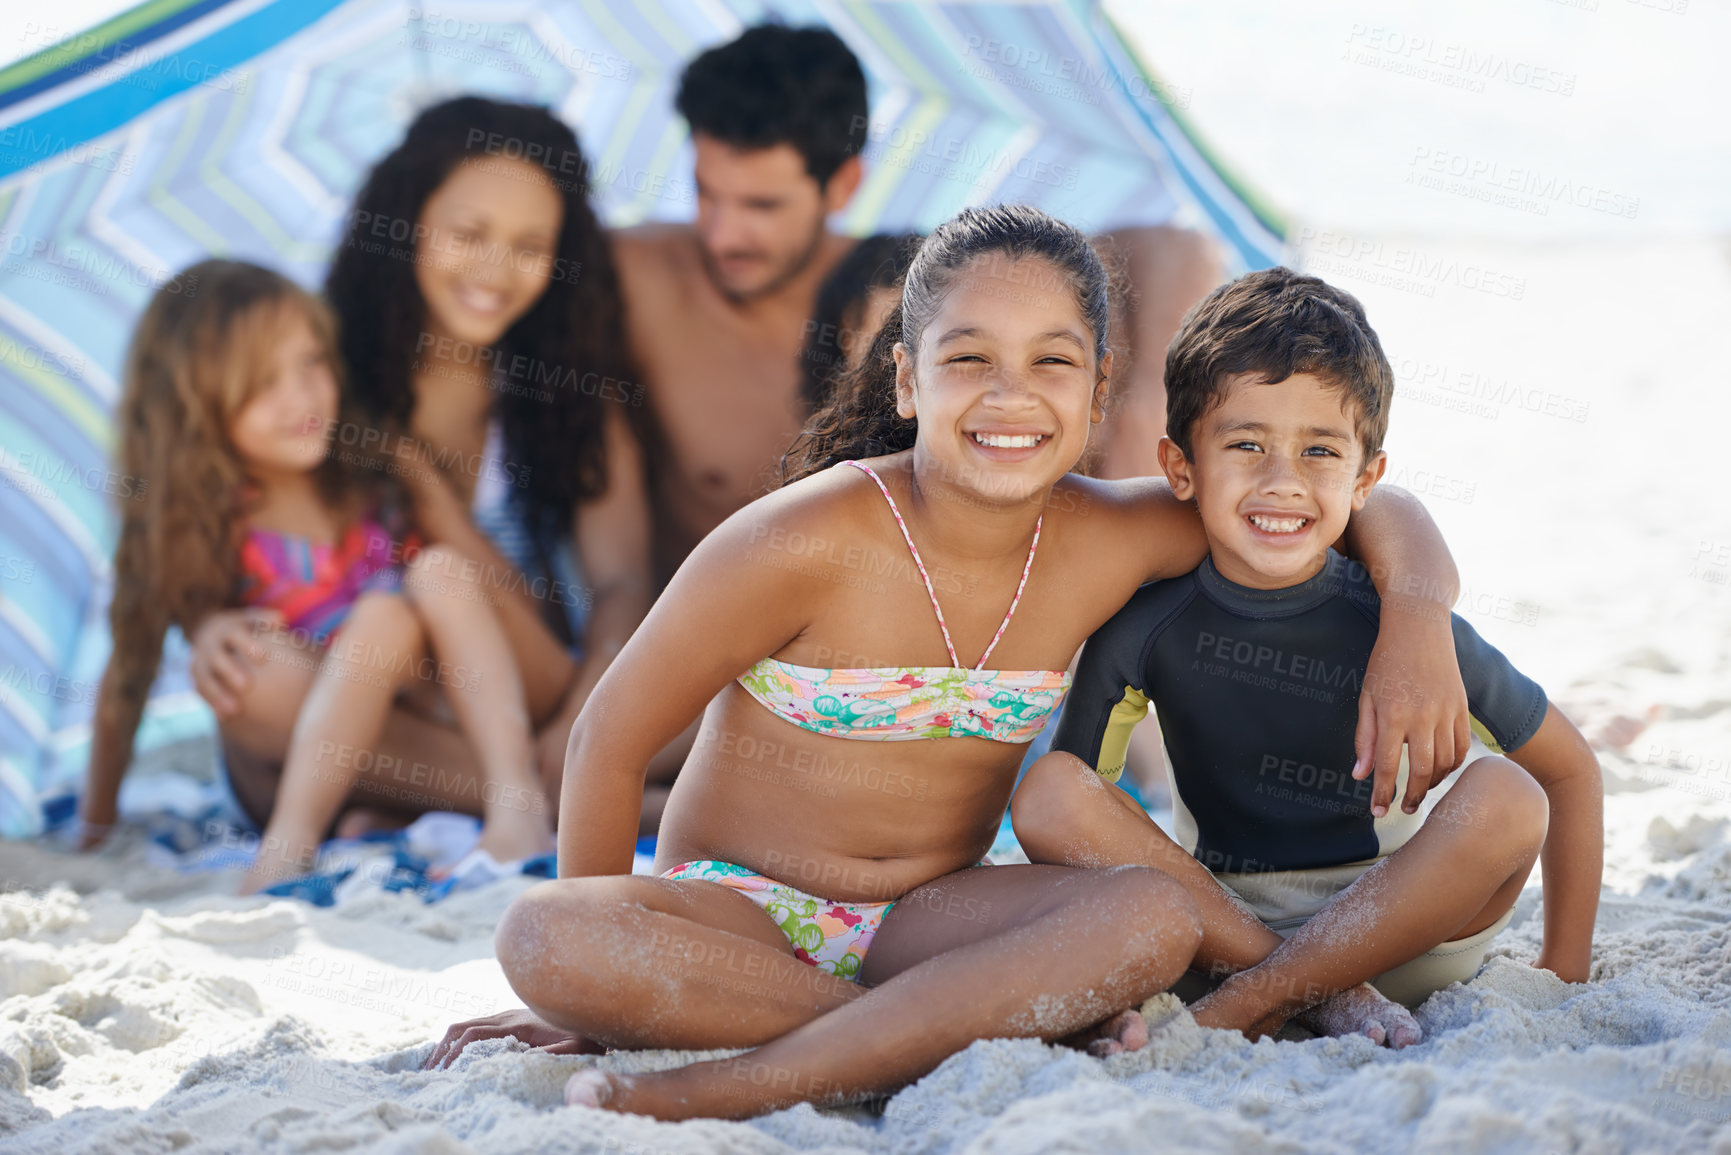 Buy stock photo Girl, boy with family on beach and smile in portrait, summer vacation with hug, bonding and love. People outdoor, holiday in Brazil with sand and sun, children happy for travel and adventure together